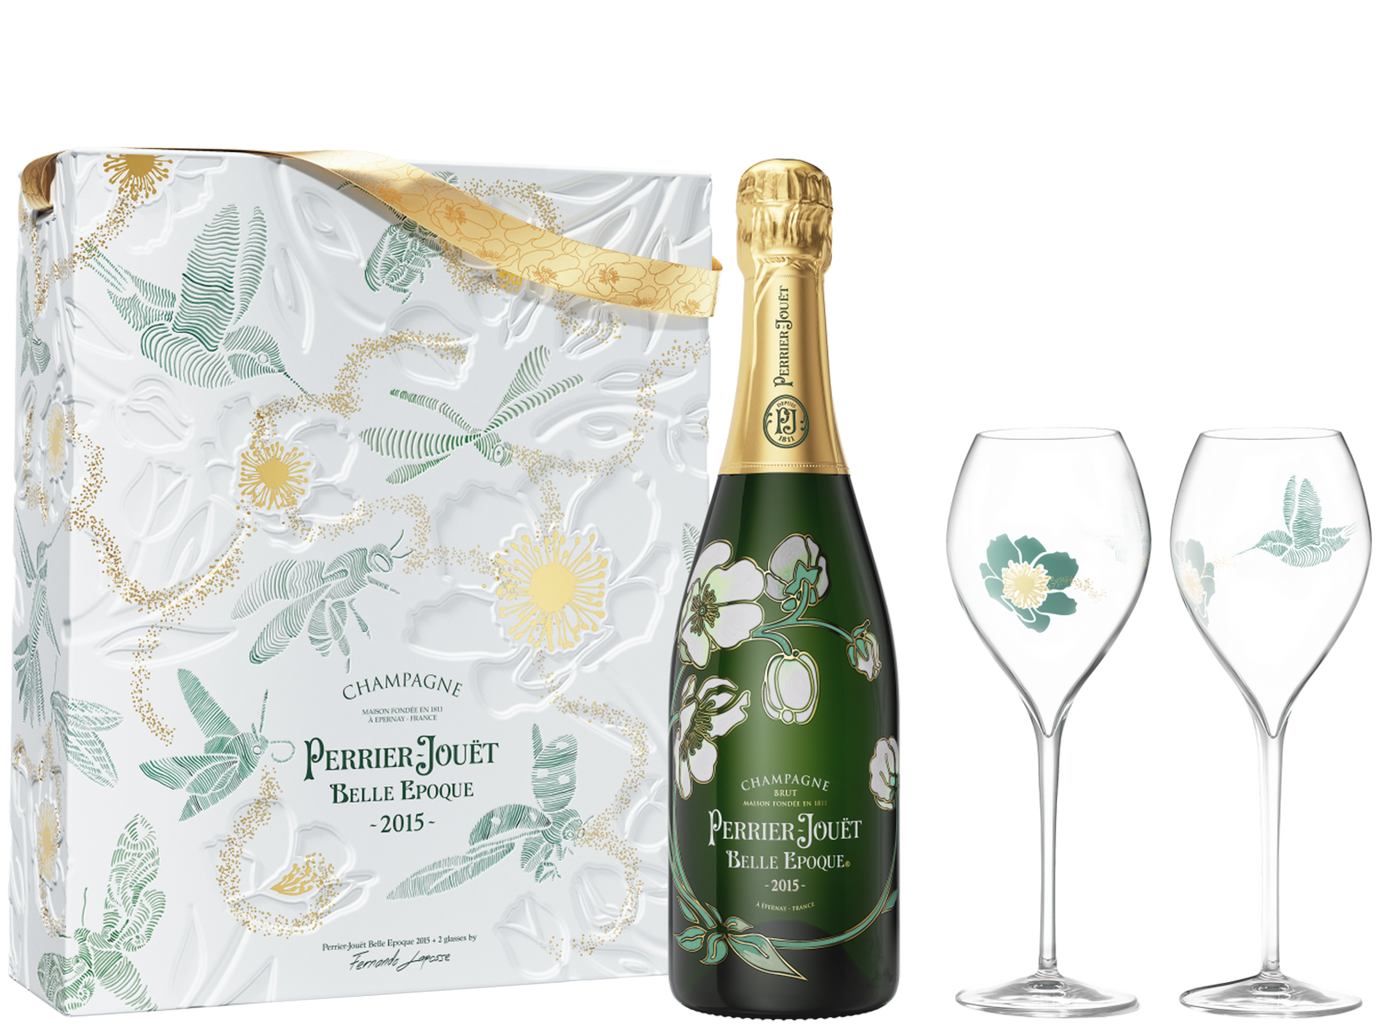 Perrier-Jouet Belle Epoque Champagne 2015 & 2x Glass Gift Box